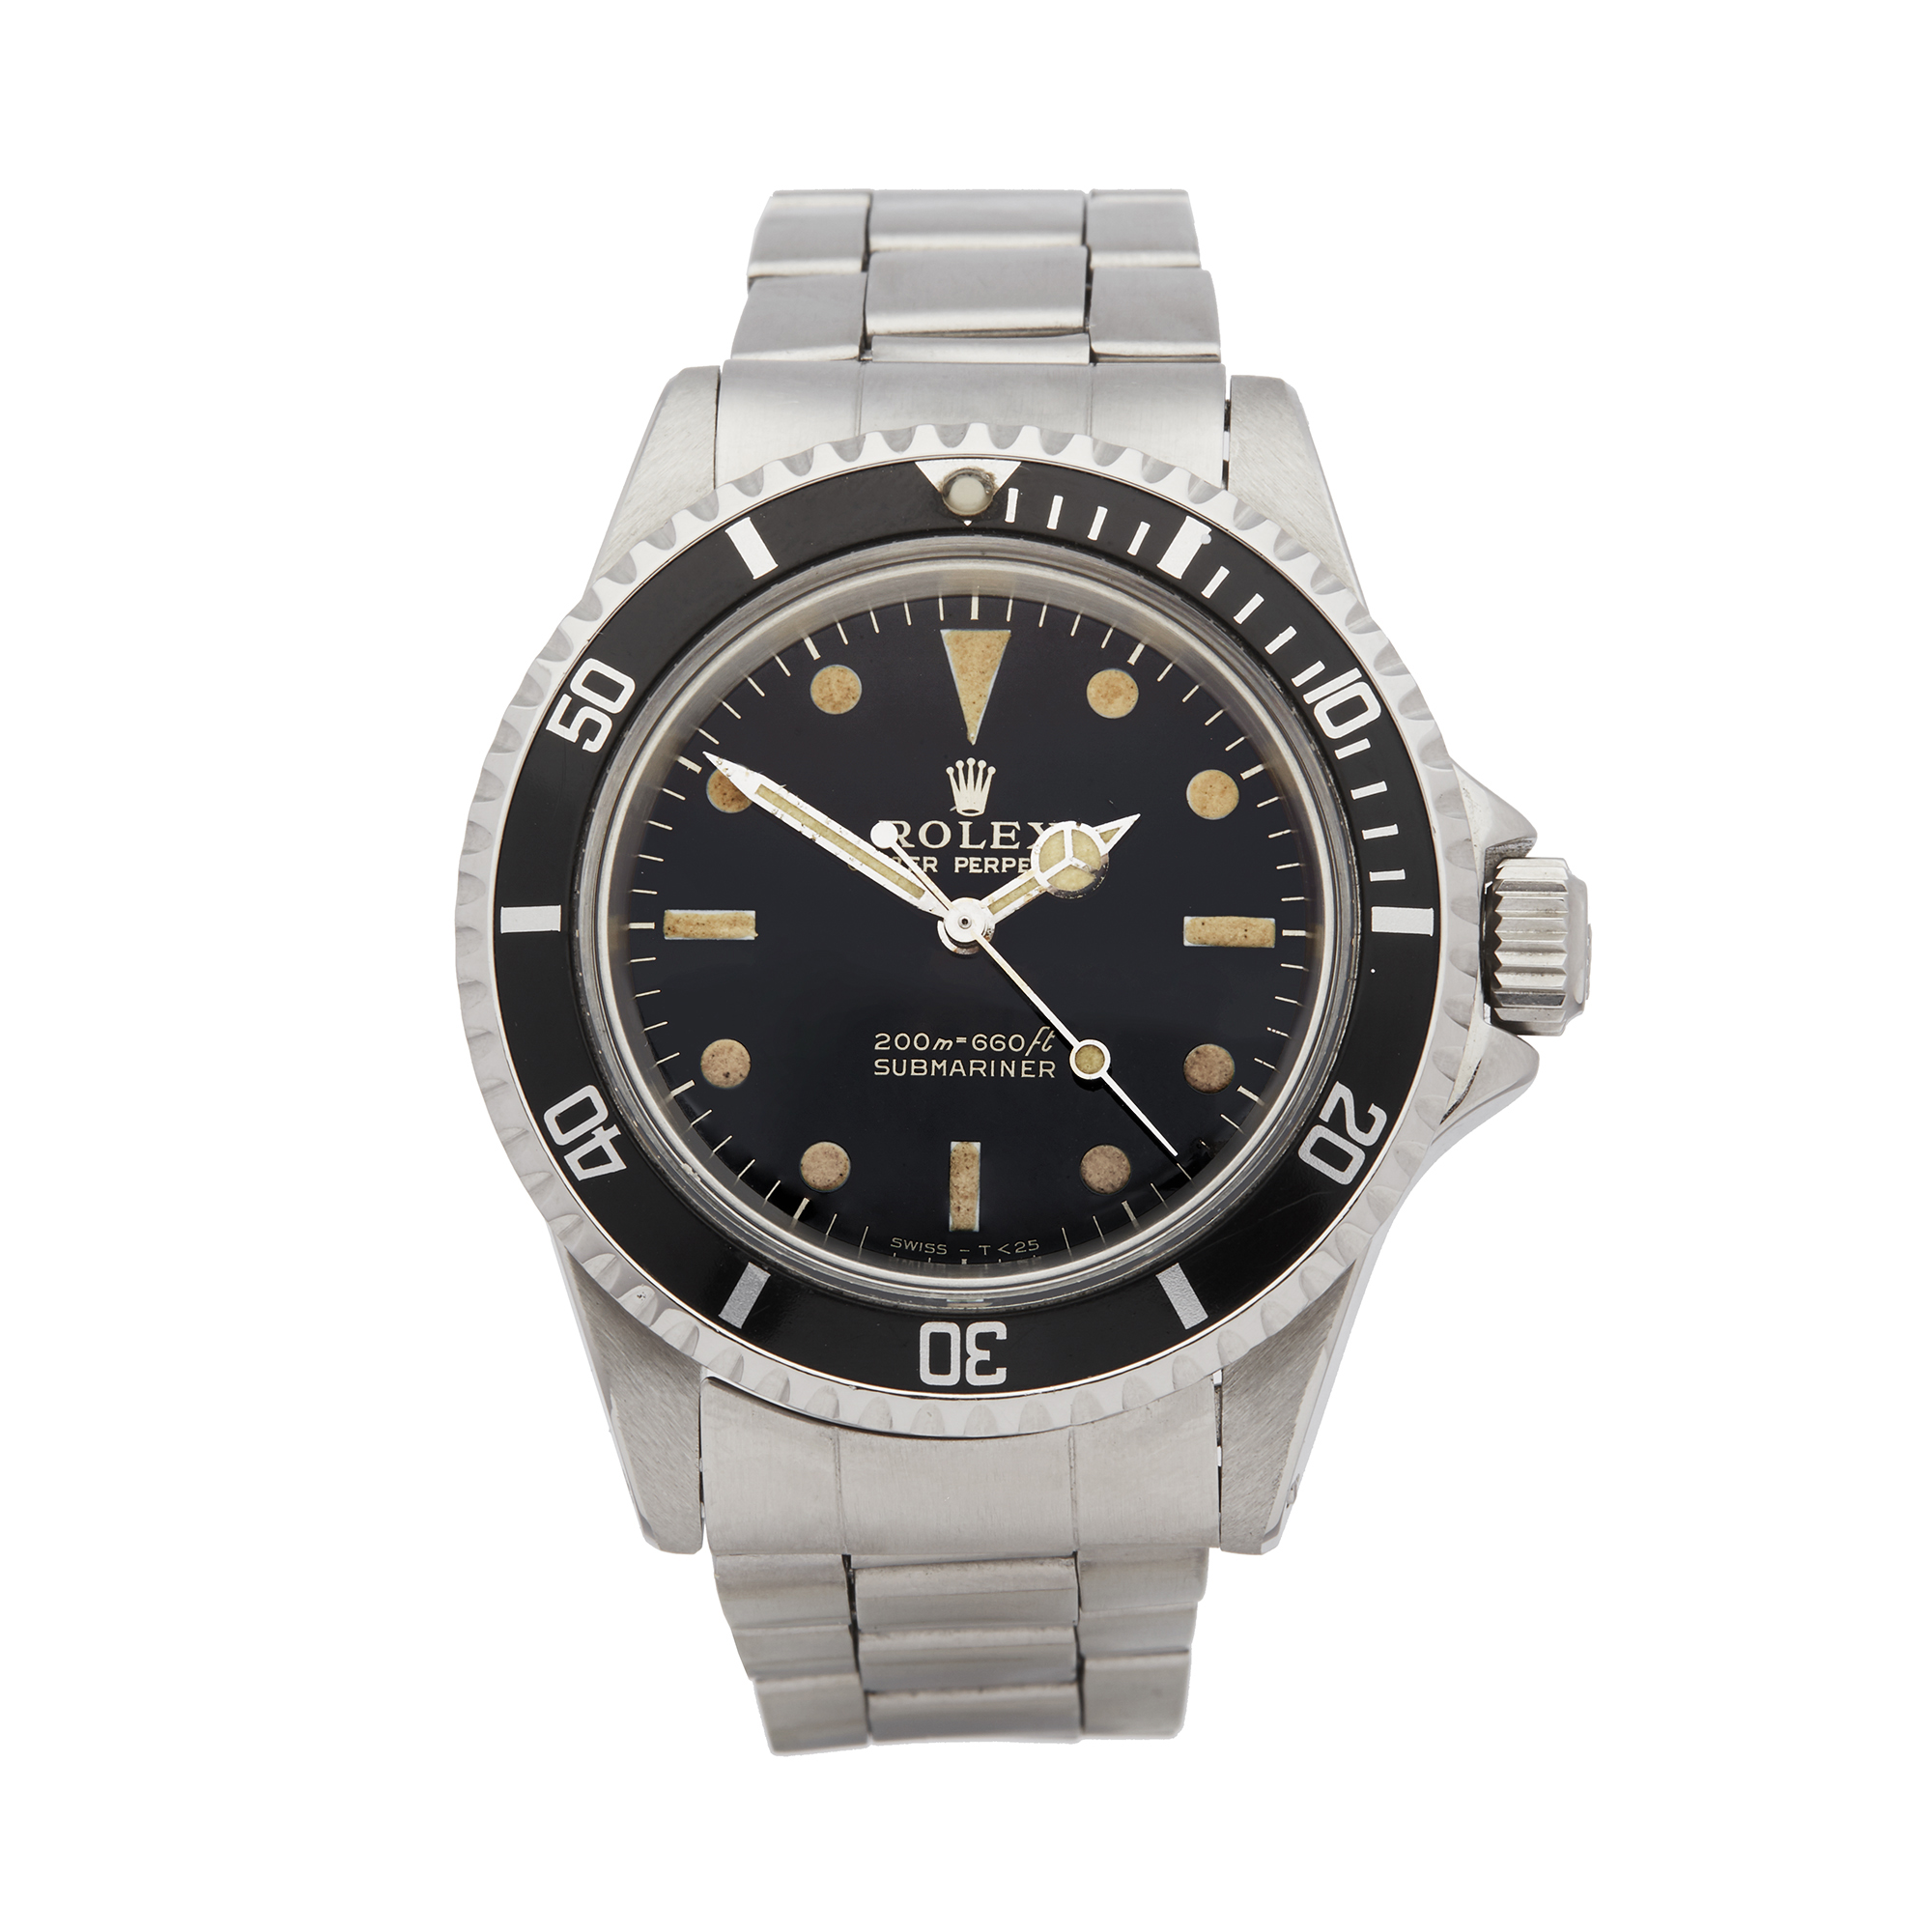 1967 Rolex Submariner Non Date Gilt Gloss Stainless Steel - 5513 - Image 6 of 9